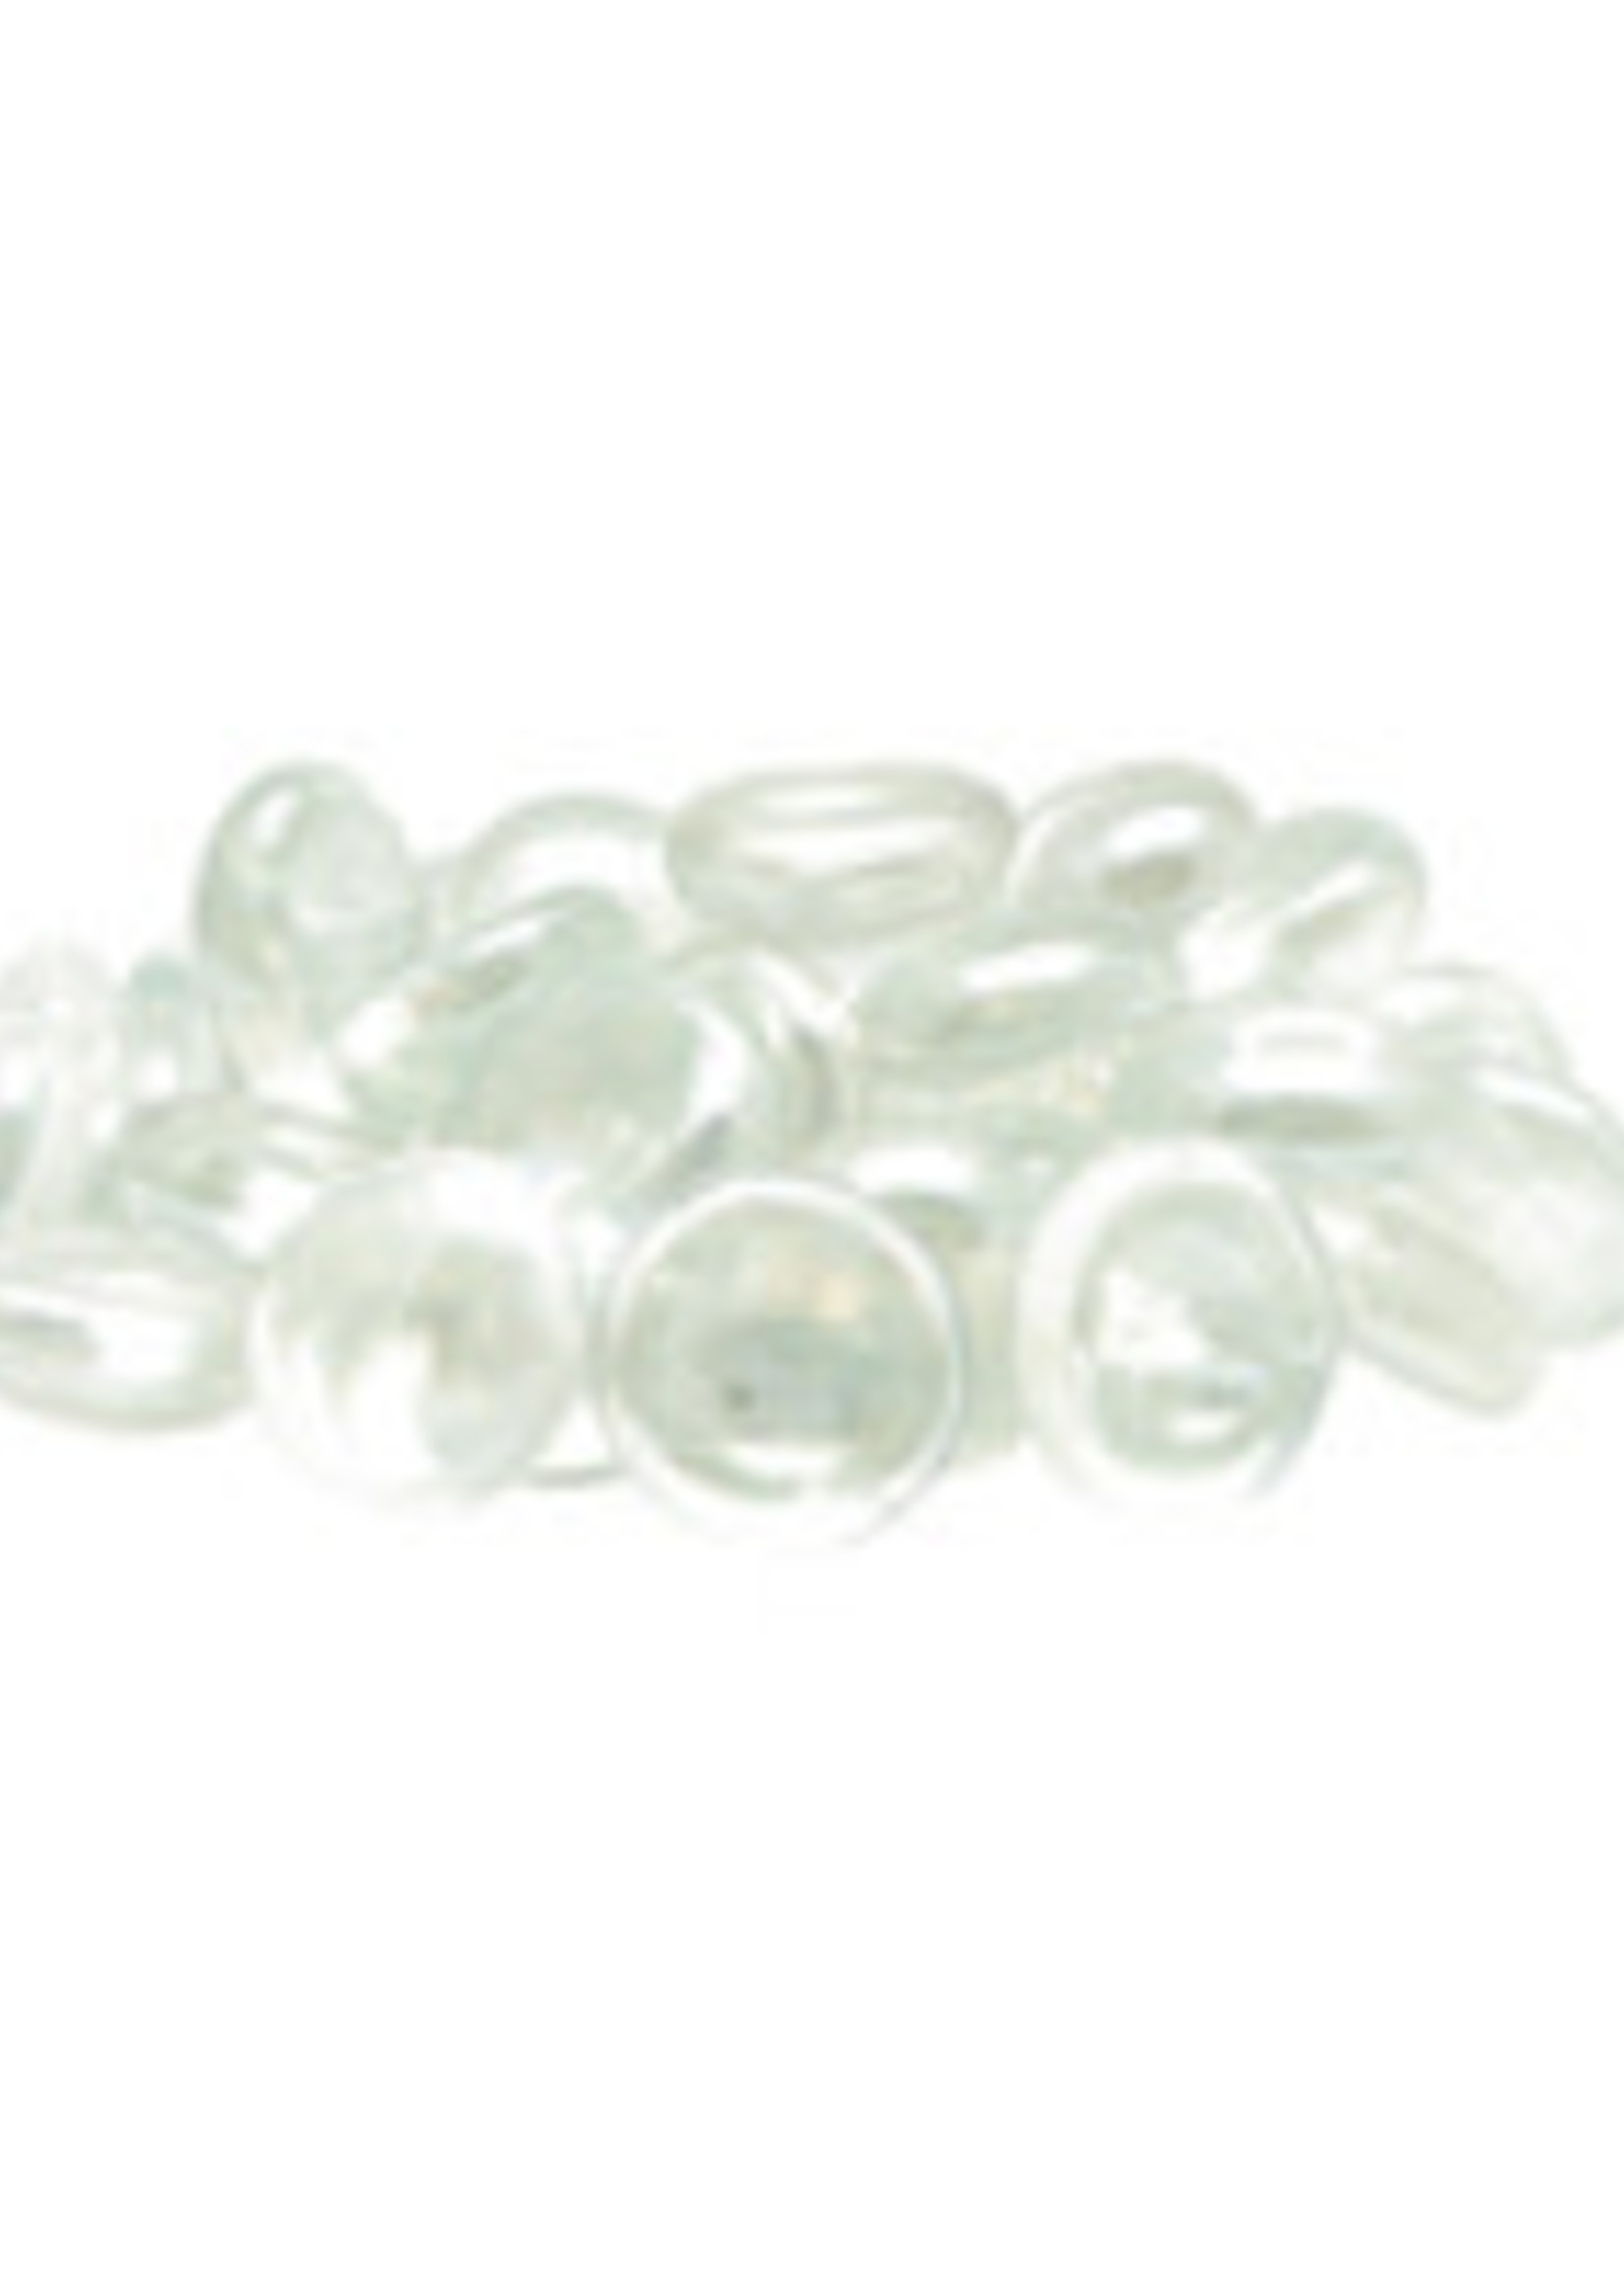 Marina® Cool Clear Decorative Marbles, 50 pieces